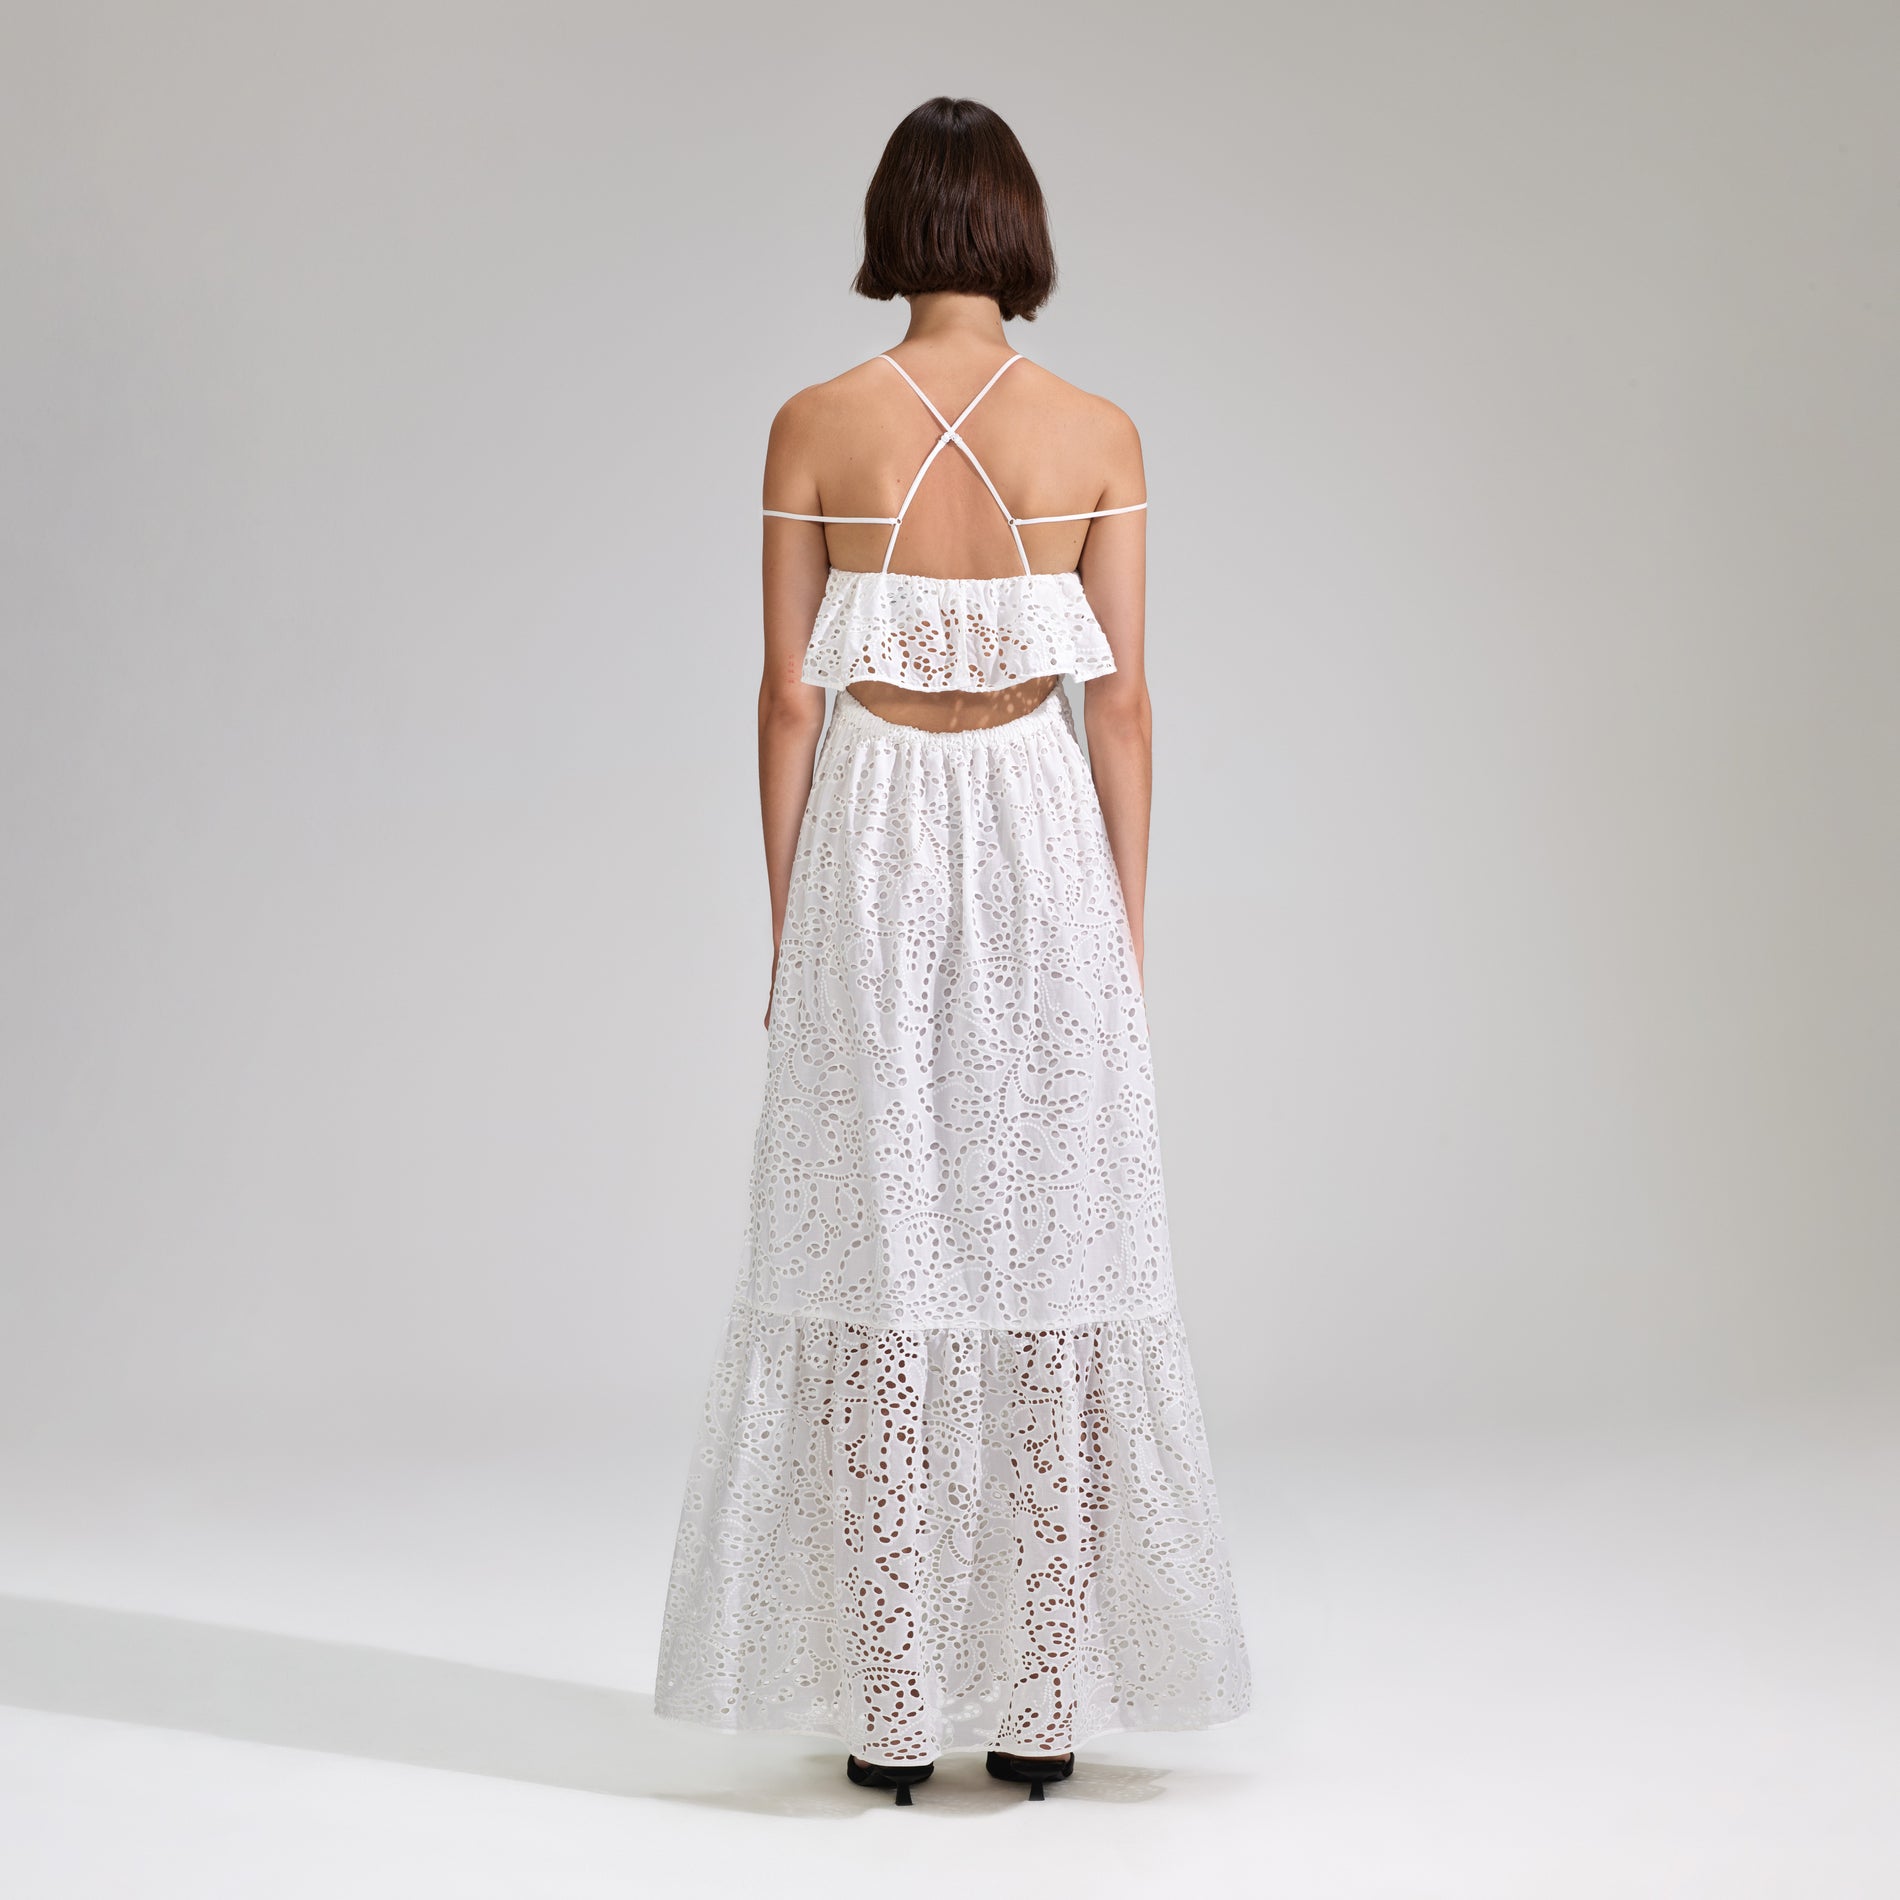 A woman wearing the White Broderie Maxi Dress